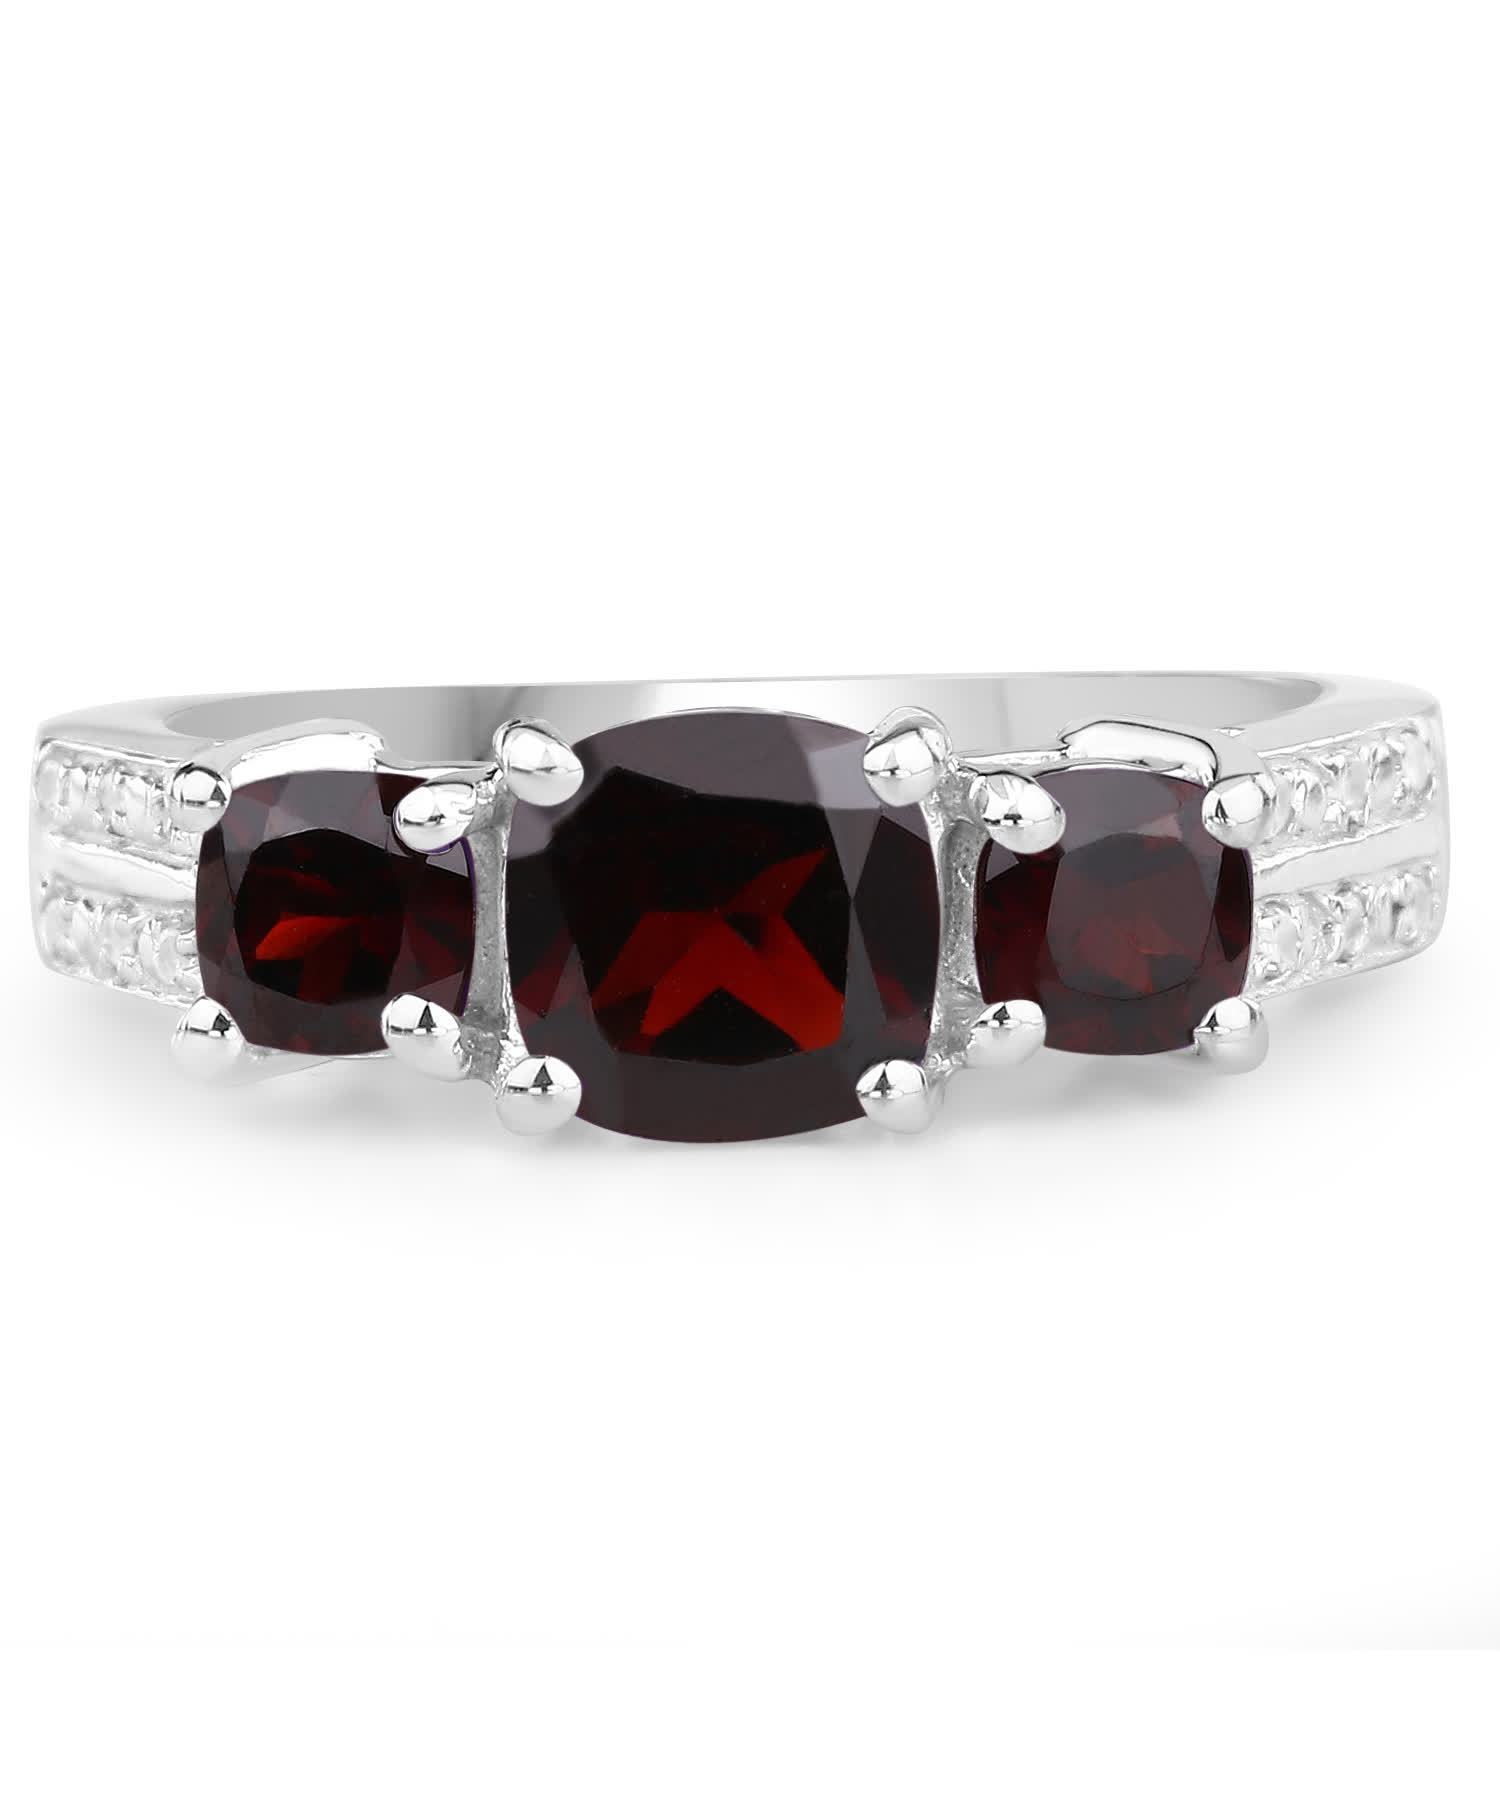 1.92ctw Natural Garnet and Topaz Rhodium Plated 925 Sterling Silver Three-Stone Right Hand Ring View 3